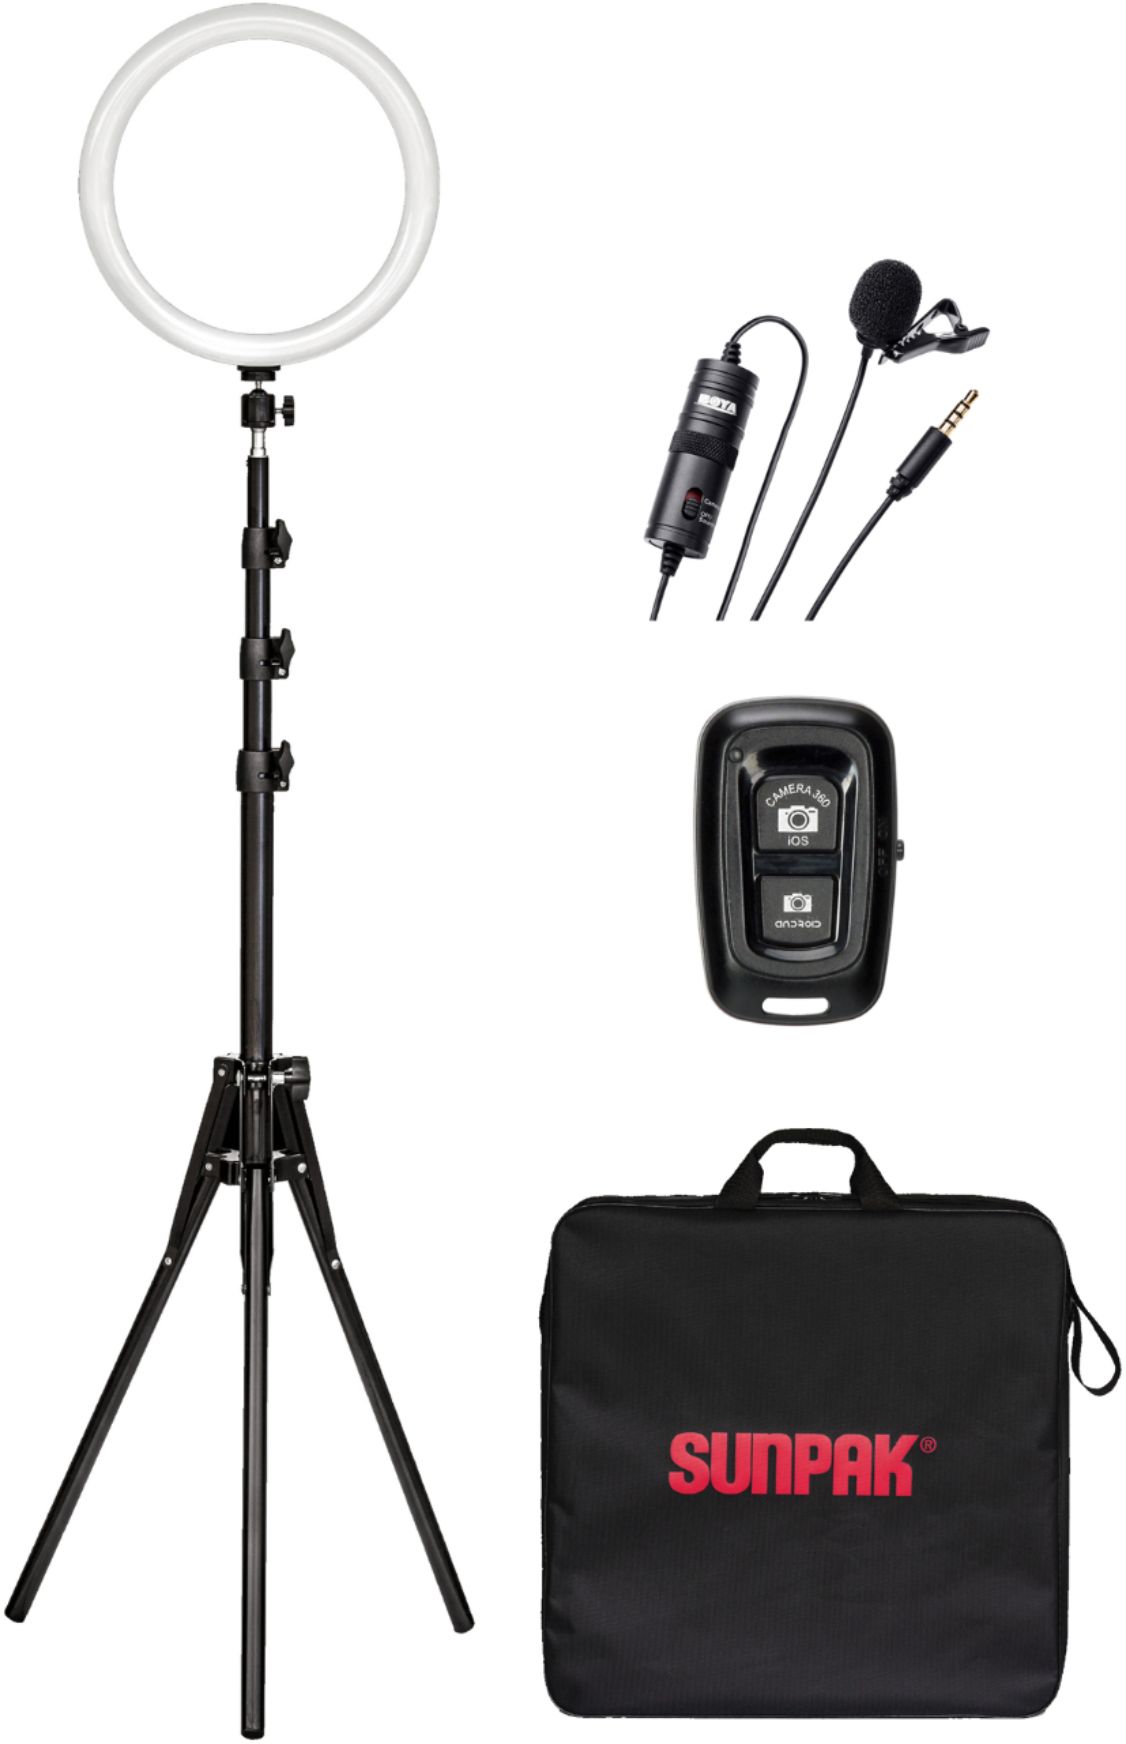 Sunpak - 12" Bi-Color Ring Light Kit with BOYA Lavalier Microphone and Bluetooth Remote for Smartphones and Compact Cameras